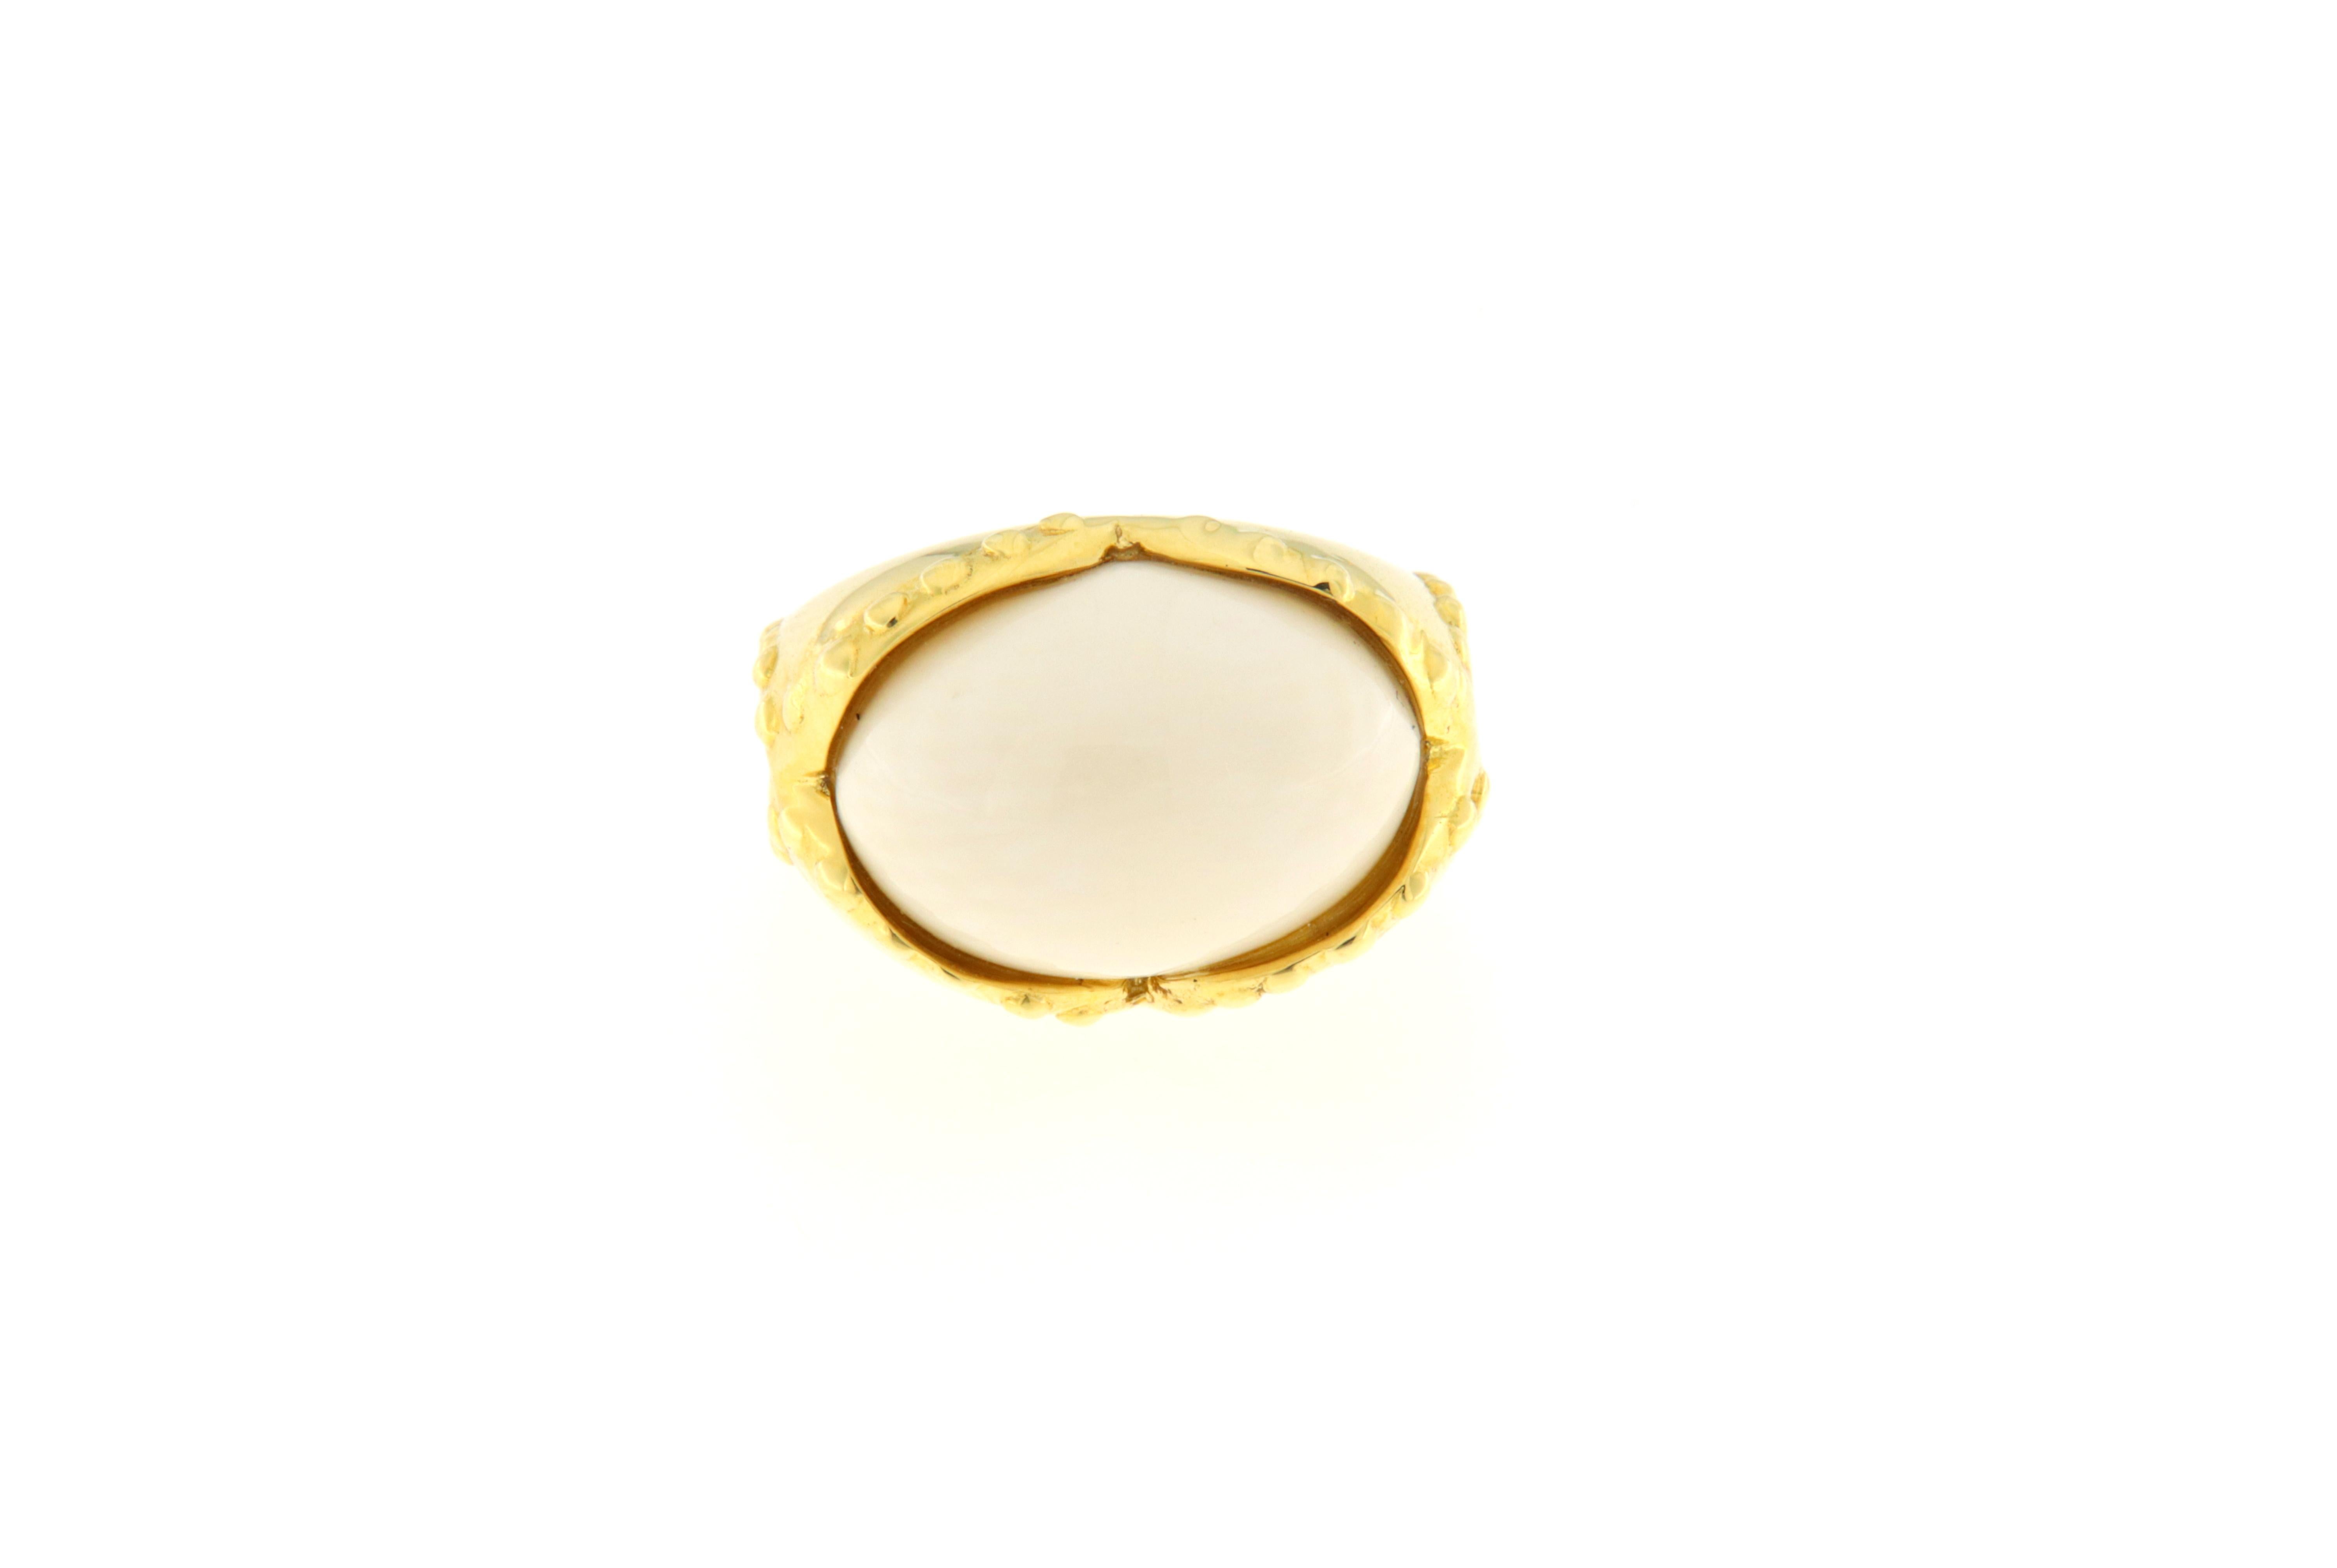 Fascinating cocktail ring made in yello gold with a central oval cabochon in fossil ivory. It is very easy to wear, you can put it on from morning to night.